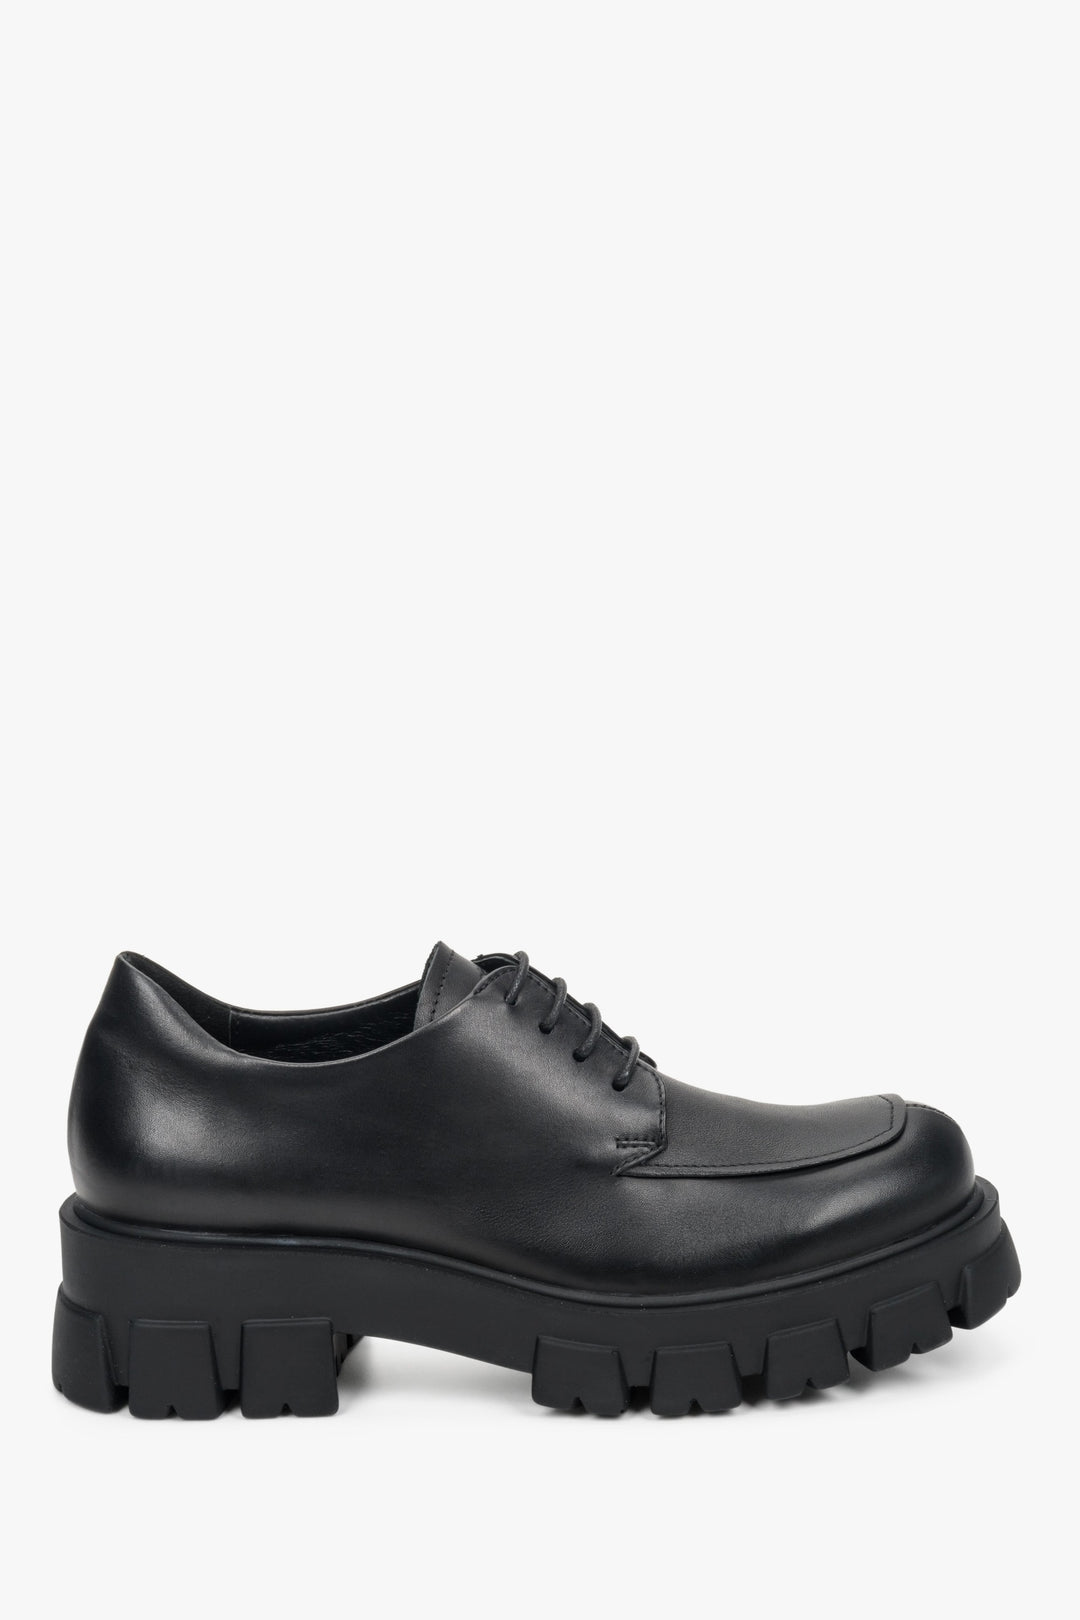 Women's black lace-up brogues made of genuine leather Estro ER00109420.